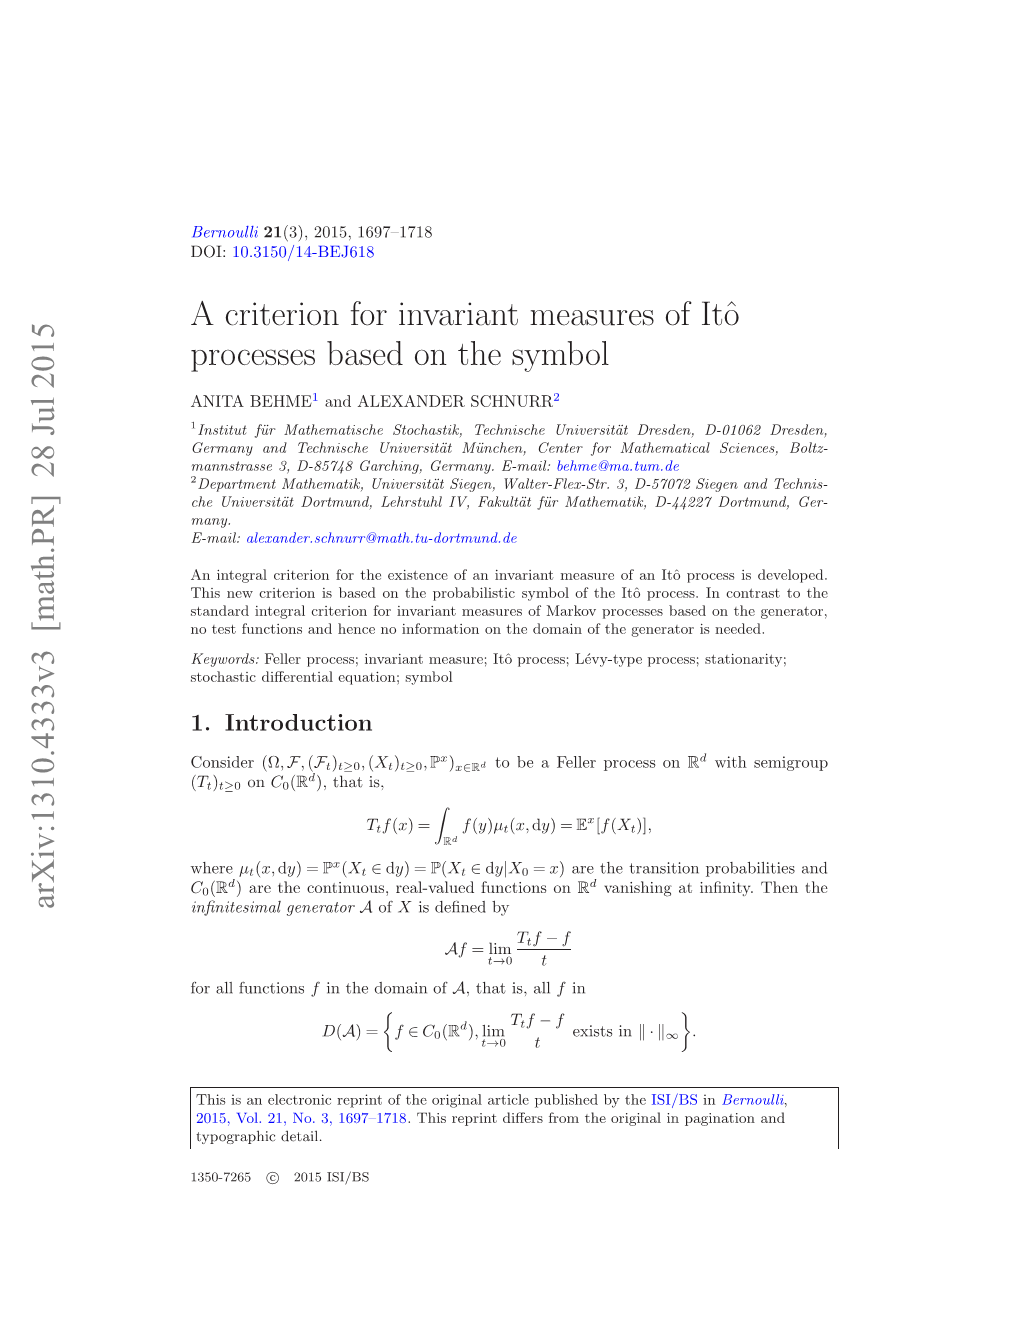 A Criterion for Invariant Measures of Itô Processes Based on the Symbol